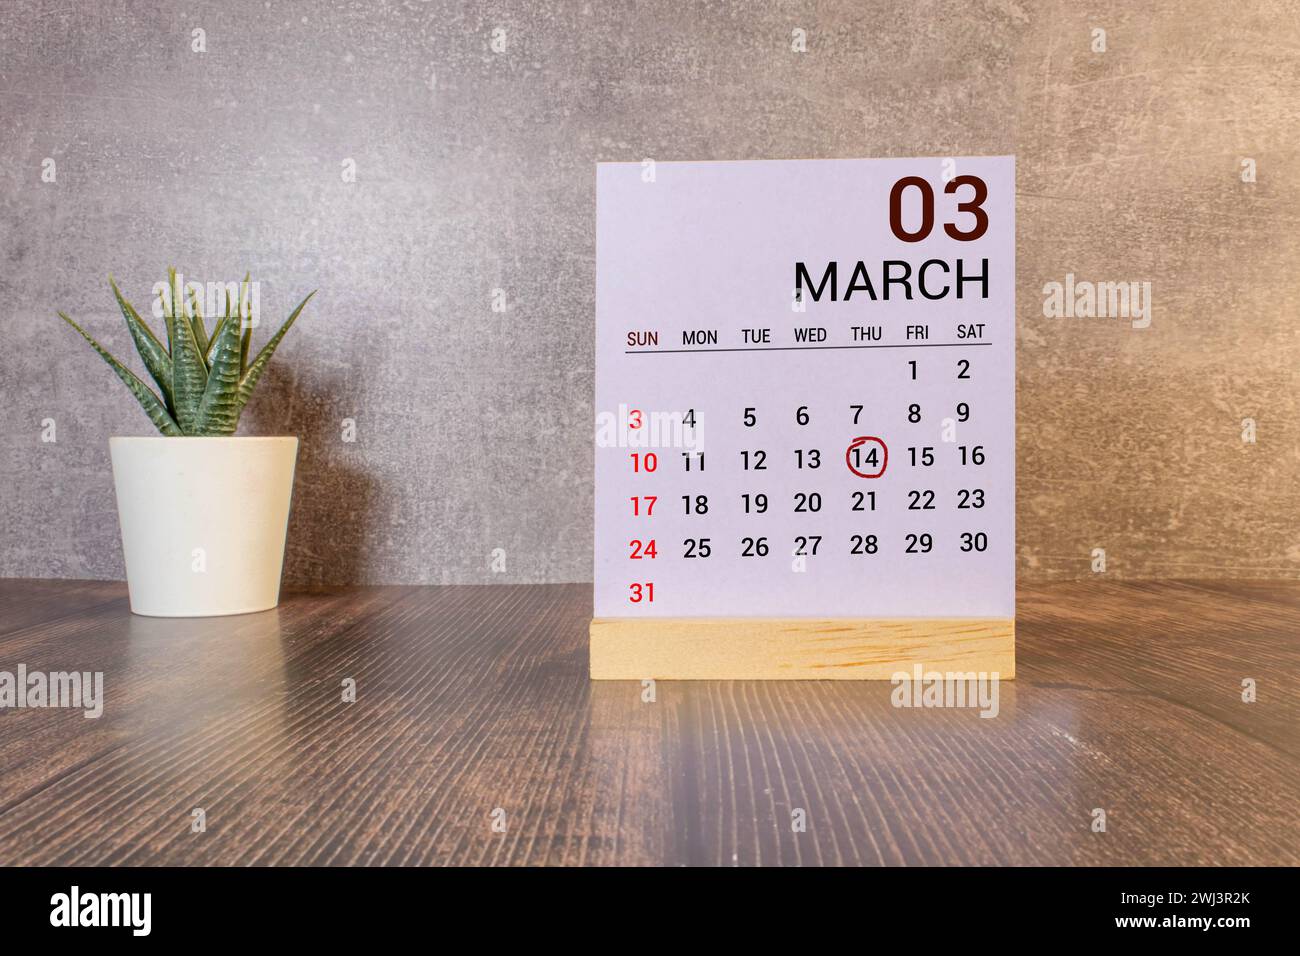 March 14th. Day 14 of month, daily calendar on wooden table background. Spring time. Commonwealth and International pi days Stock Photo